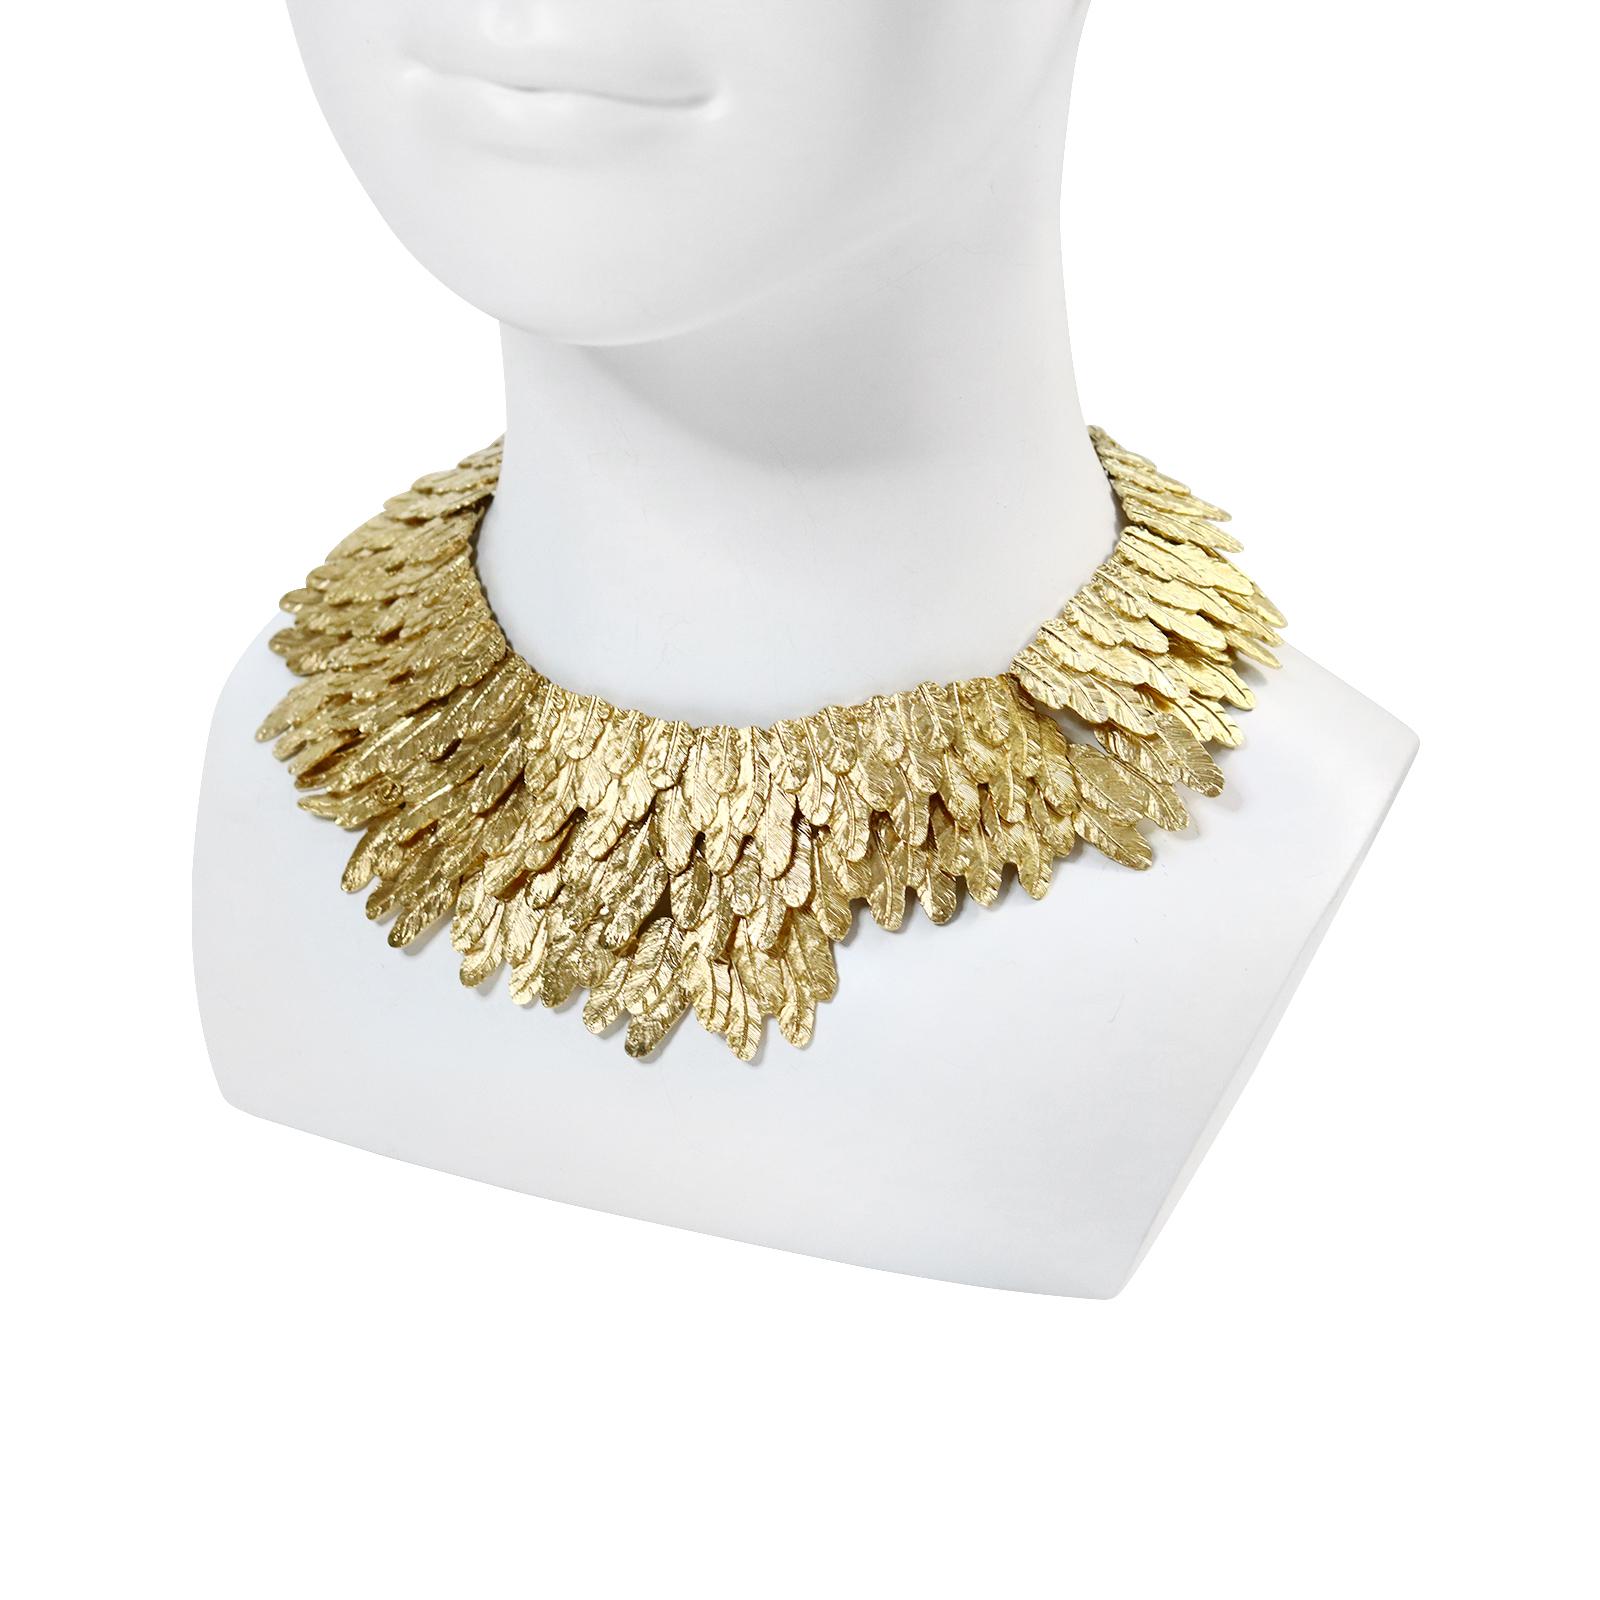 Collectible Chanel Gold Collar Necklace Circa 2008 In Excellent Condition For Sale In New York, NY